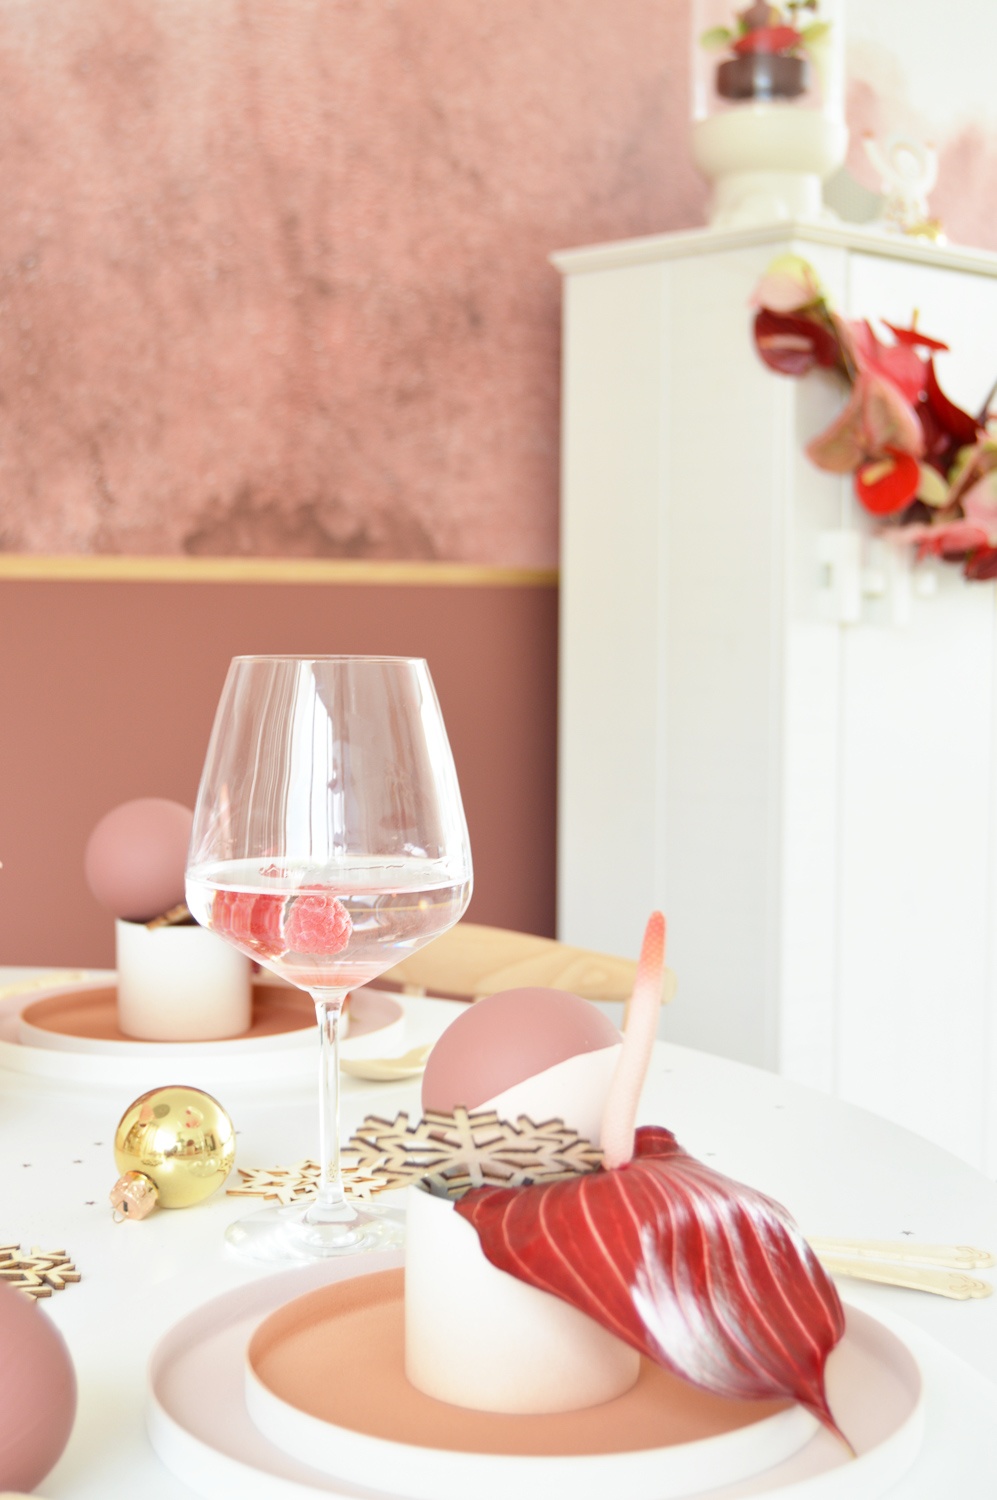 3 tips for a festive table styling for Christmas with Anthuriums